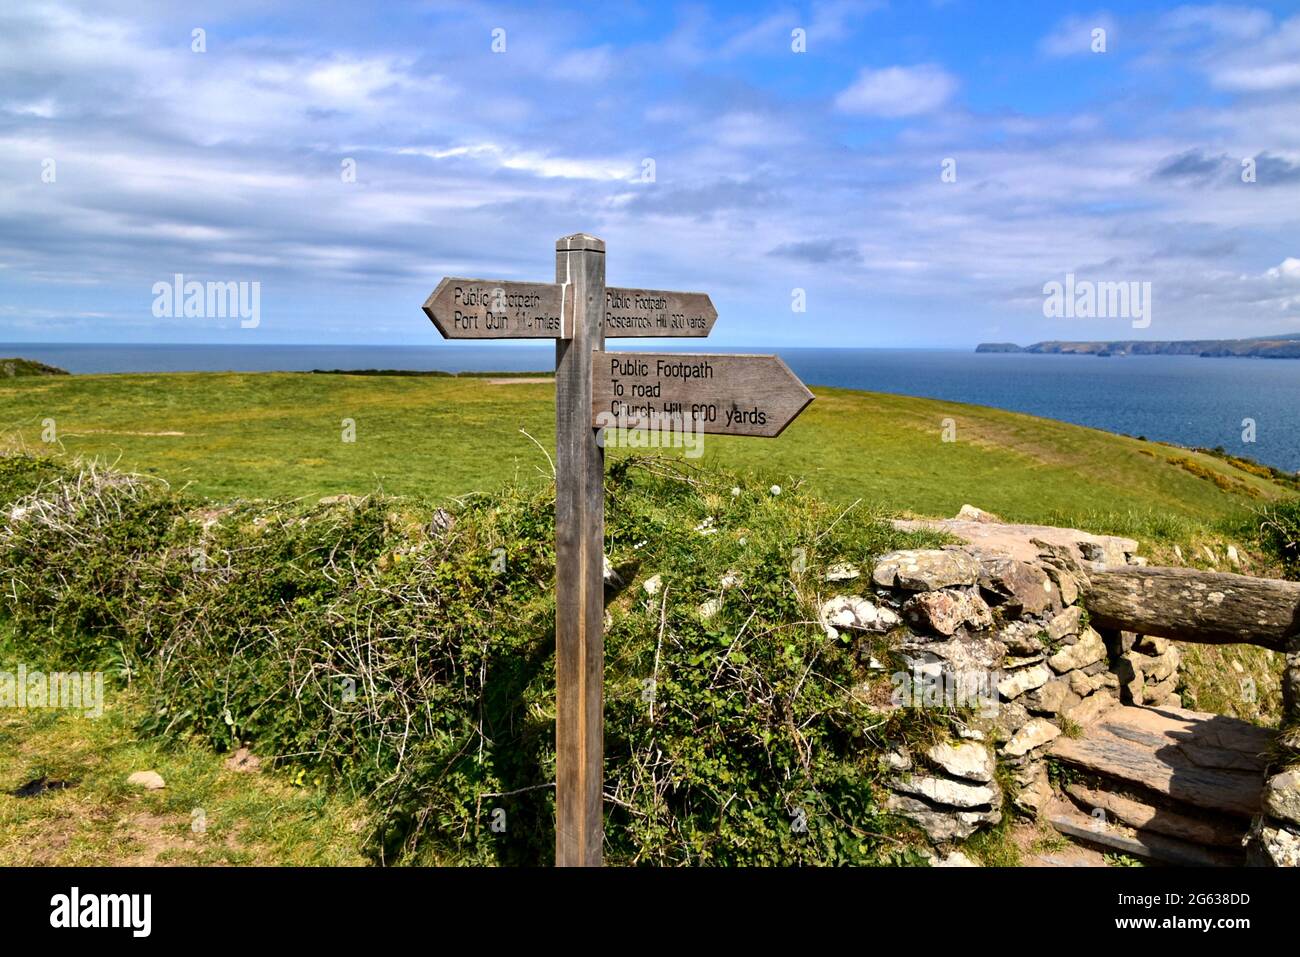 Footpath signpost on the path between Port Isaac and Port Quin. Stock Photo